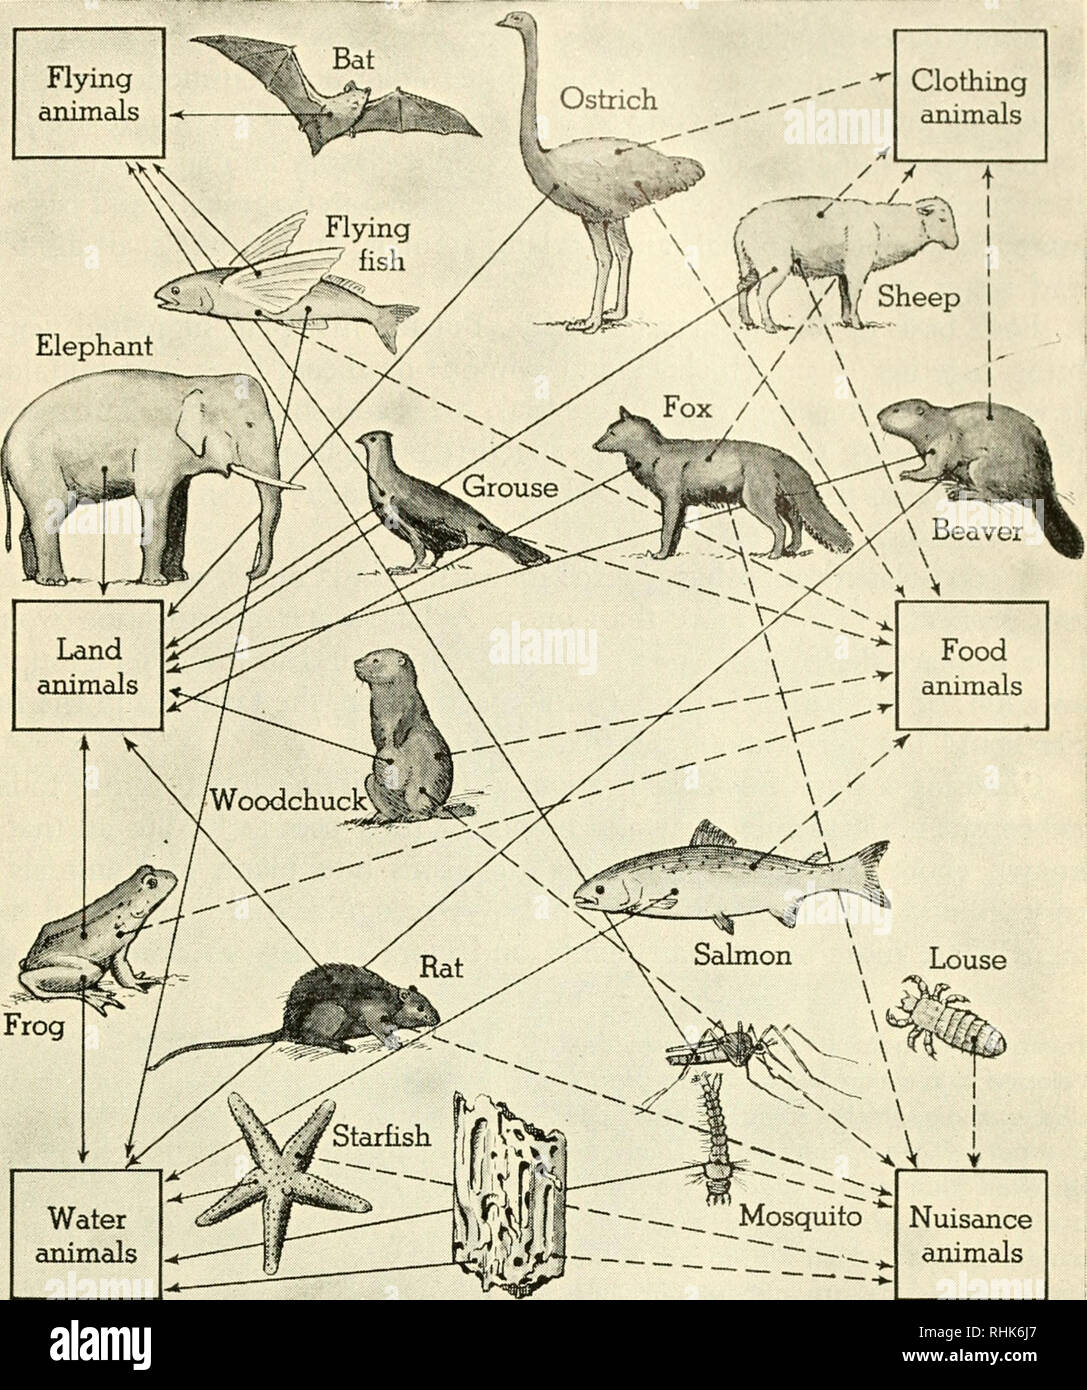 Biology and man. Biology; Human beings. Flying animals Clothing animals.  Water animals Nuisance animals L WAYS OF SORTING Shipworm We can classify  animals according to our concern with them or according